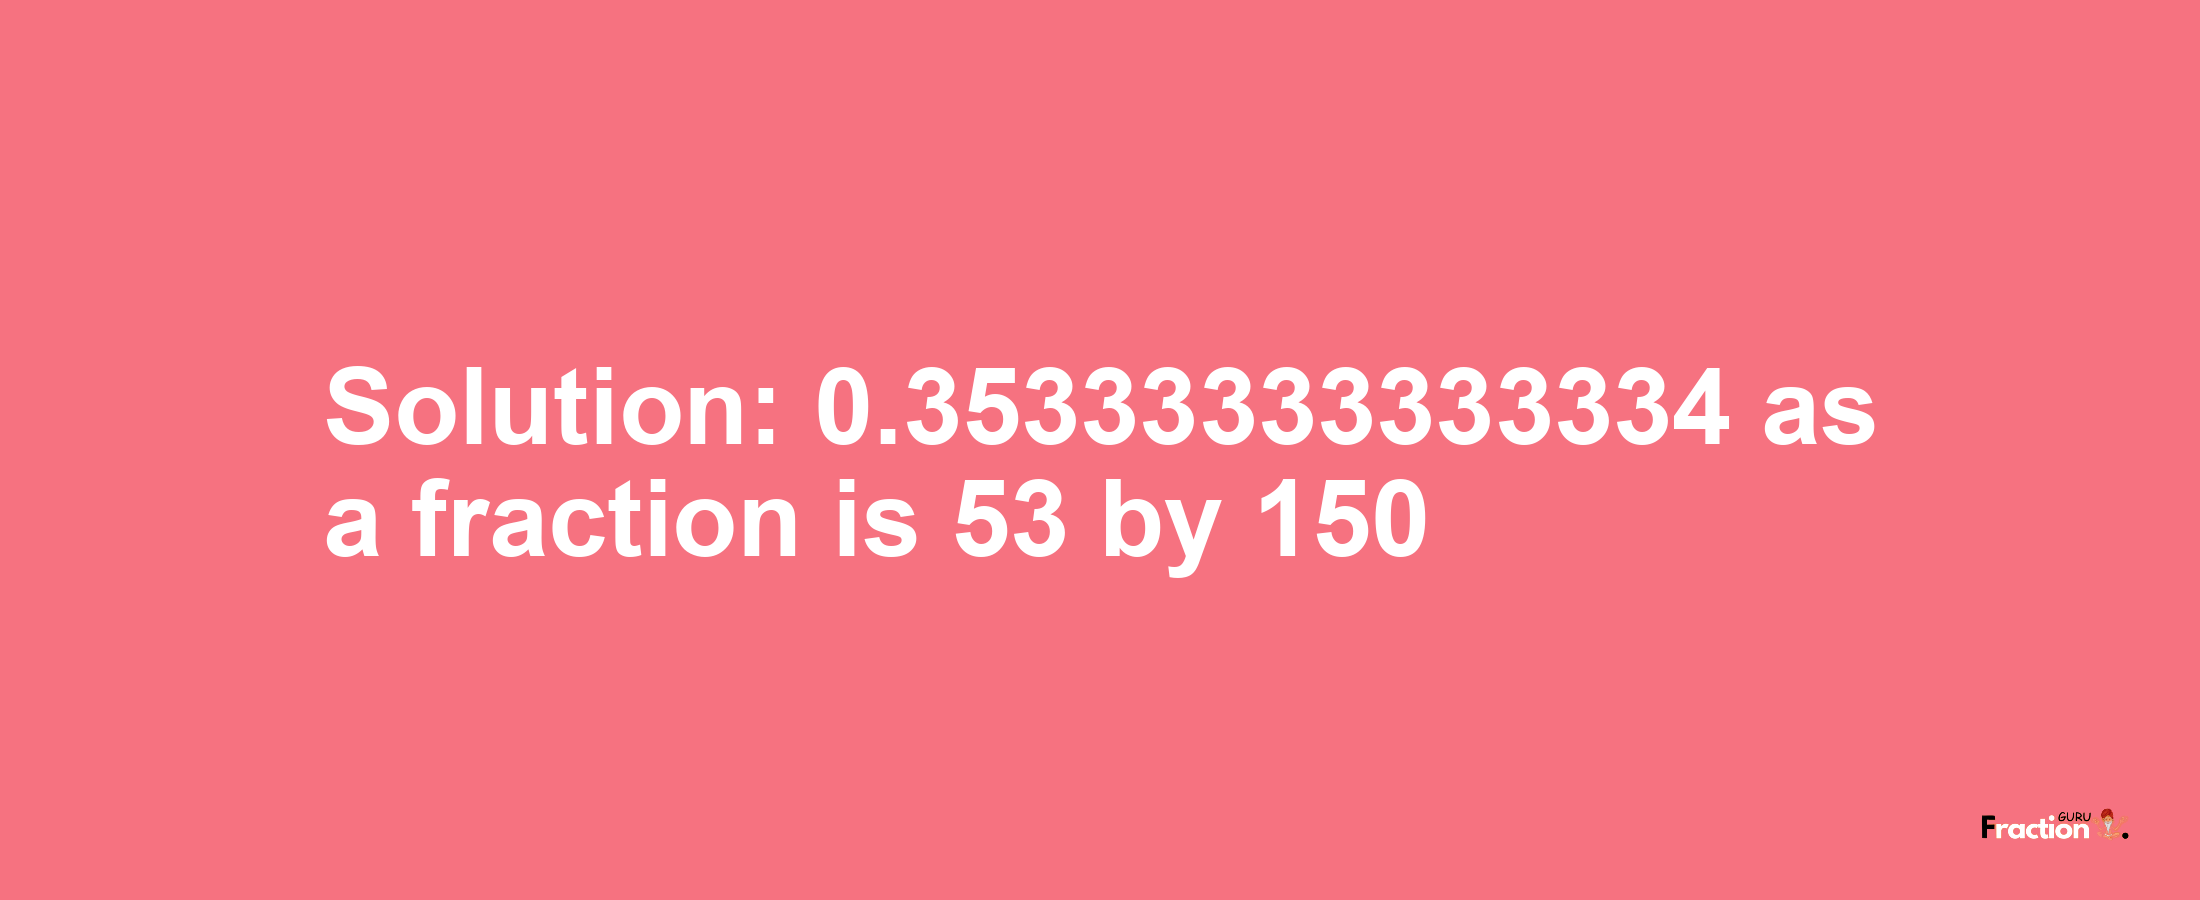 Solution:0.35333333333334 as a fraction is 53/150